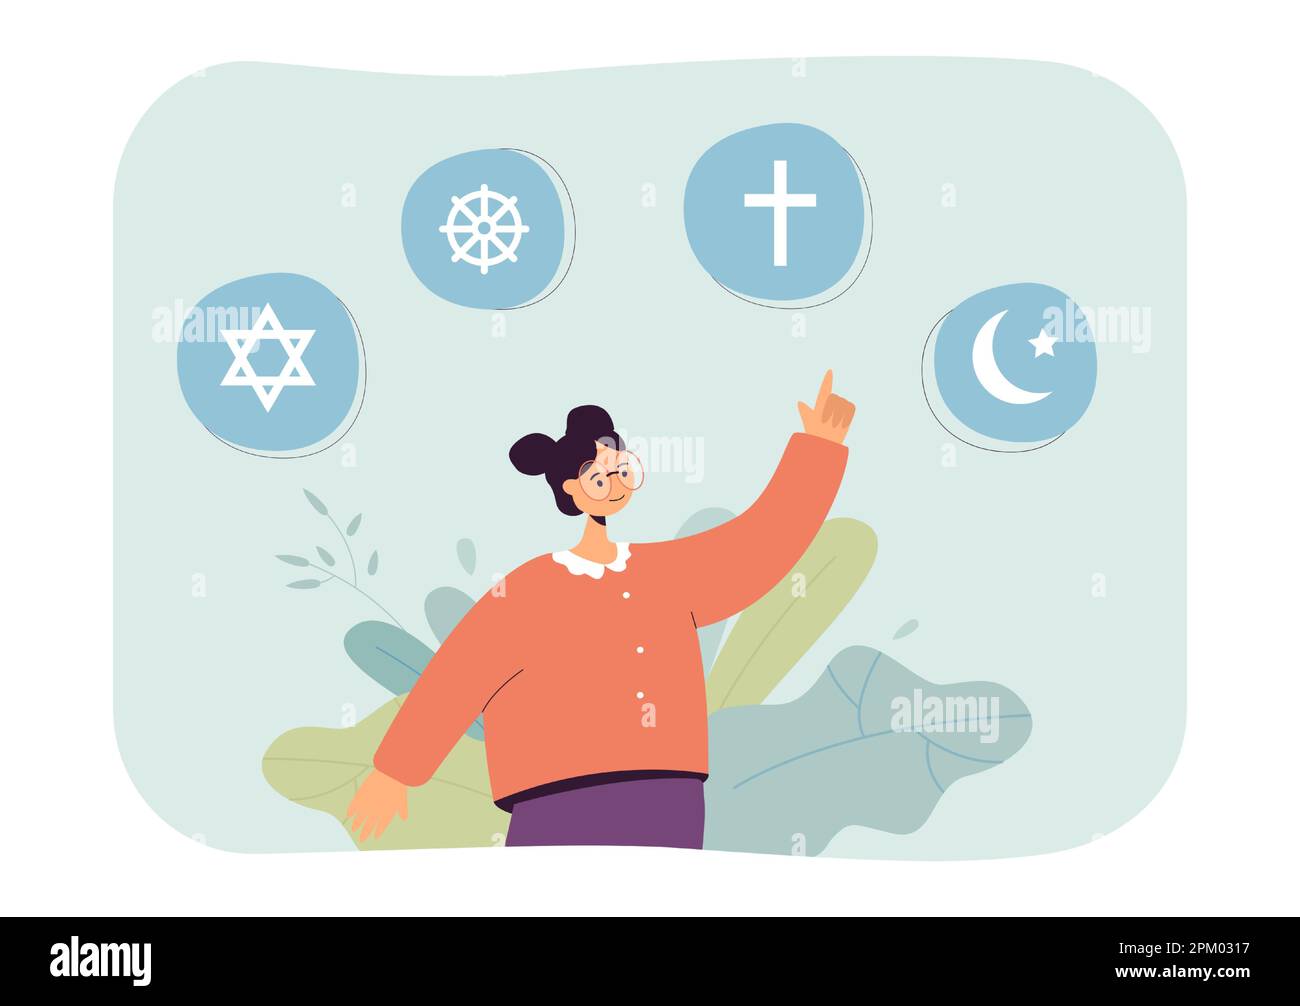 Cartoon girl pointing at symbols of different religions Stock Vector